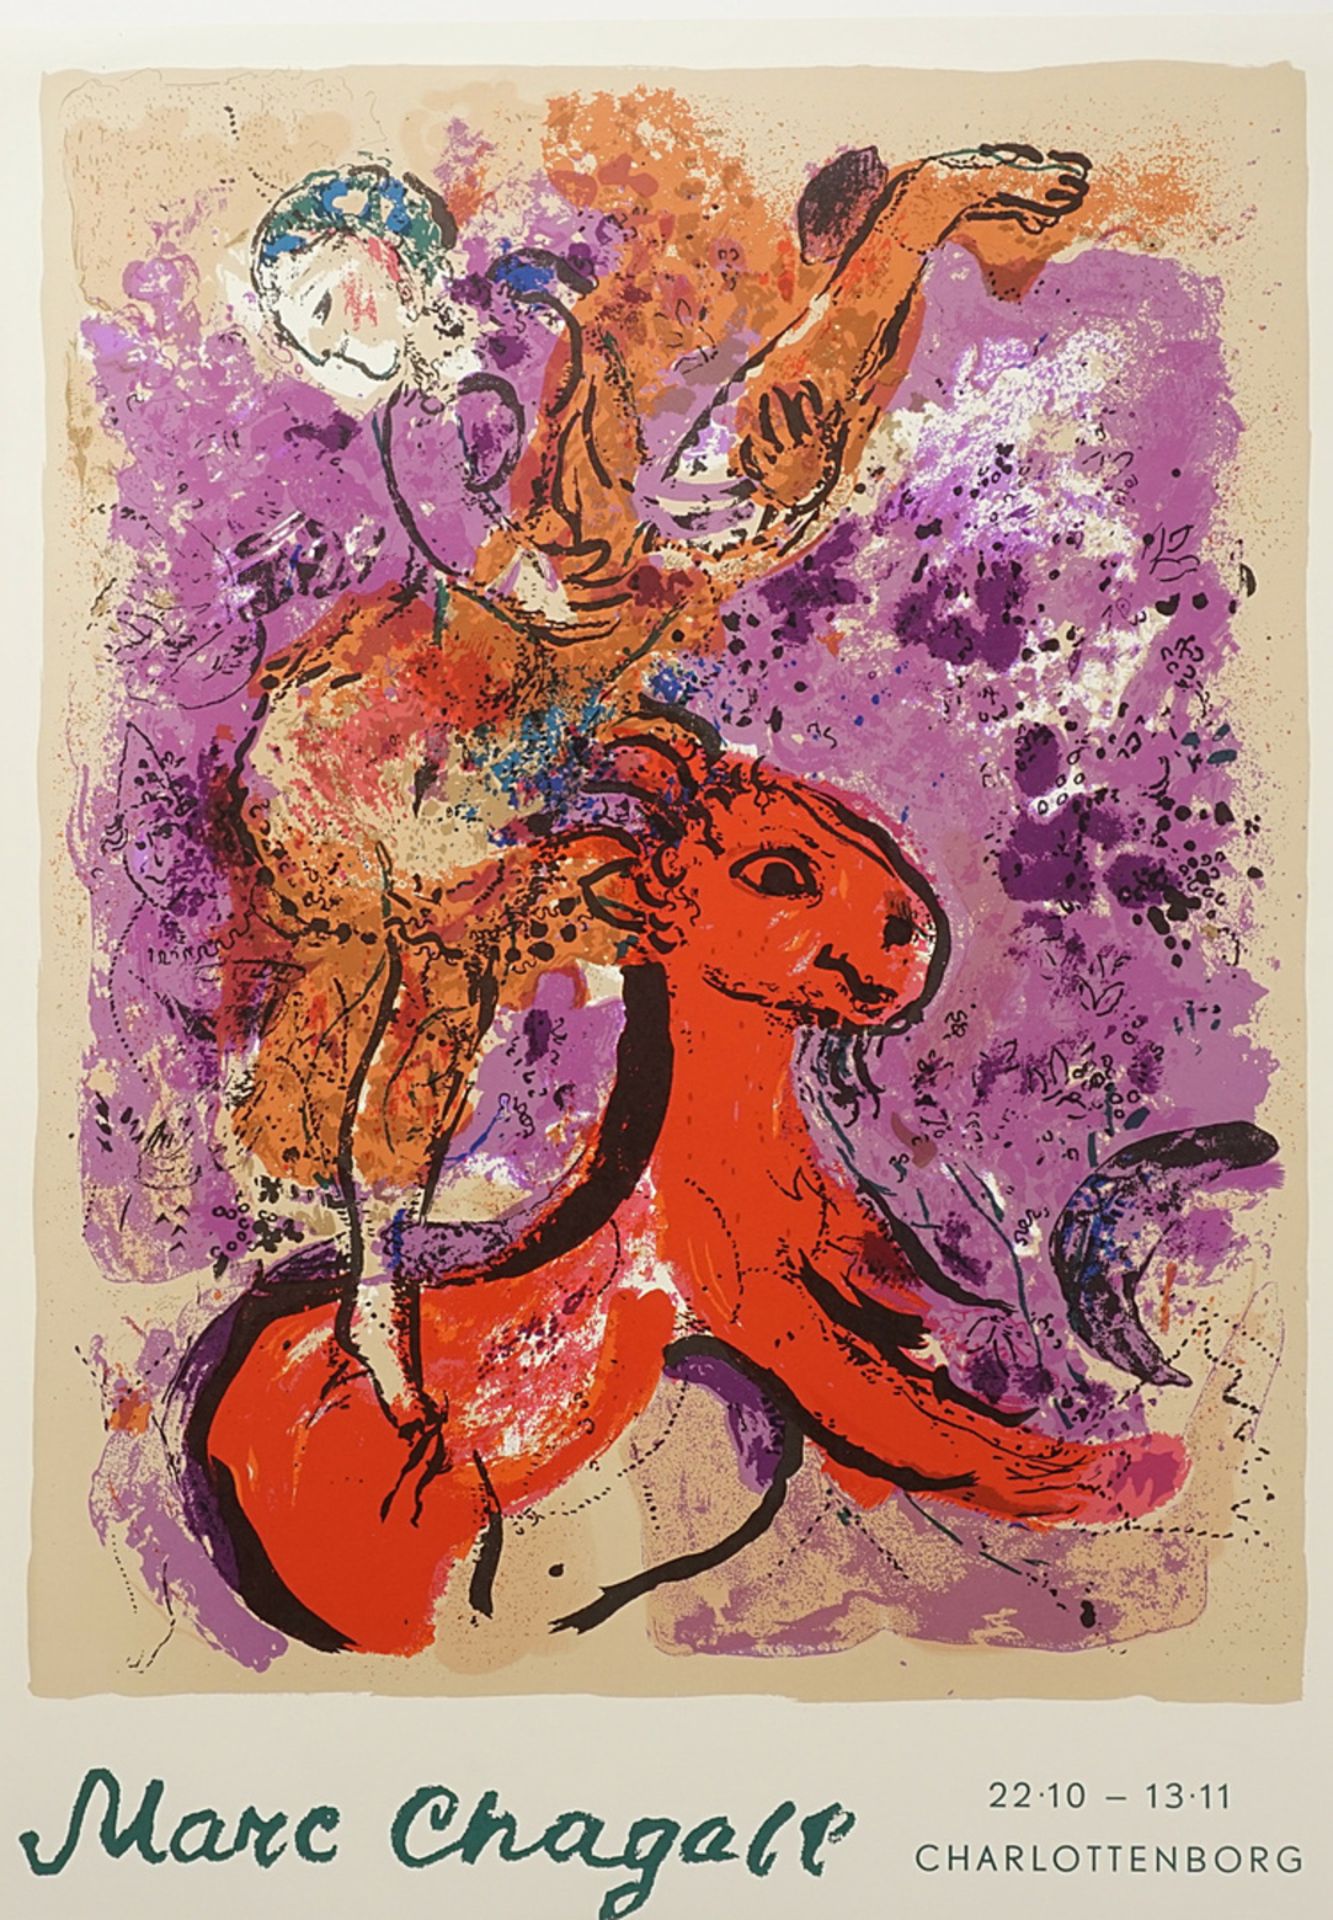 Marc Chagall (1887-1985), Poster for the exhibition at Charlottenborg, Copenhagen, 1960